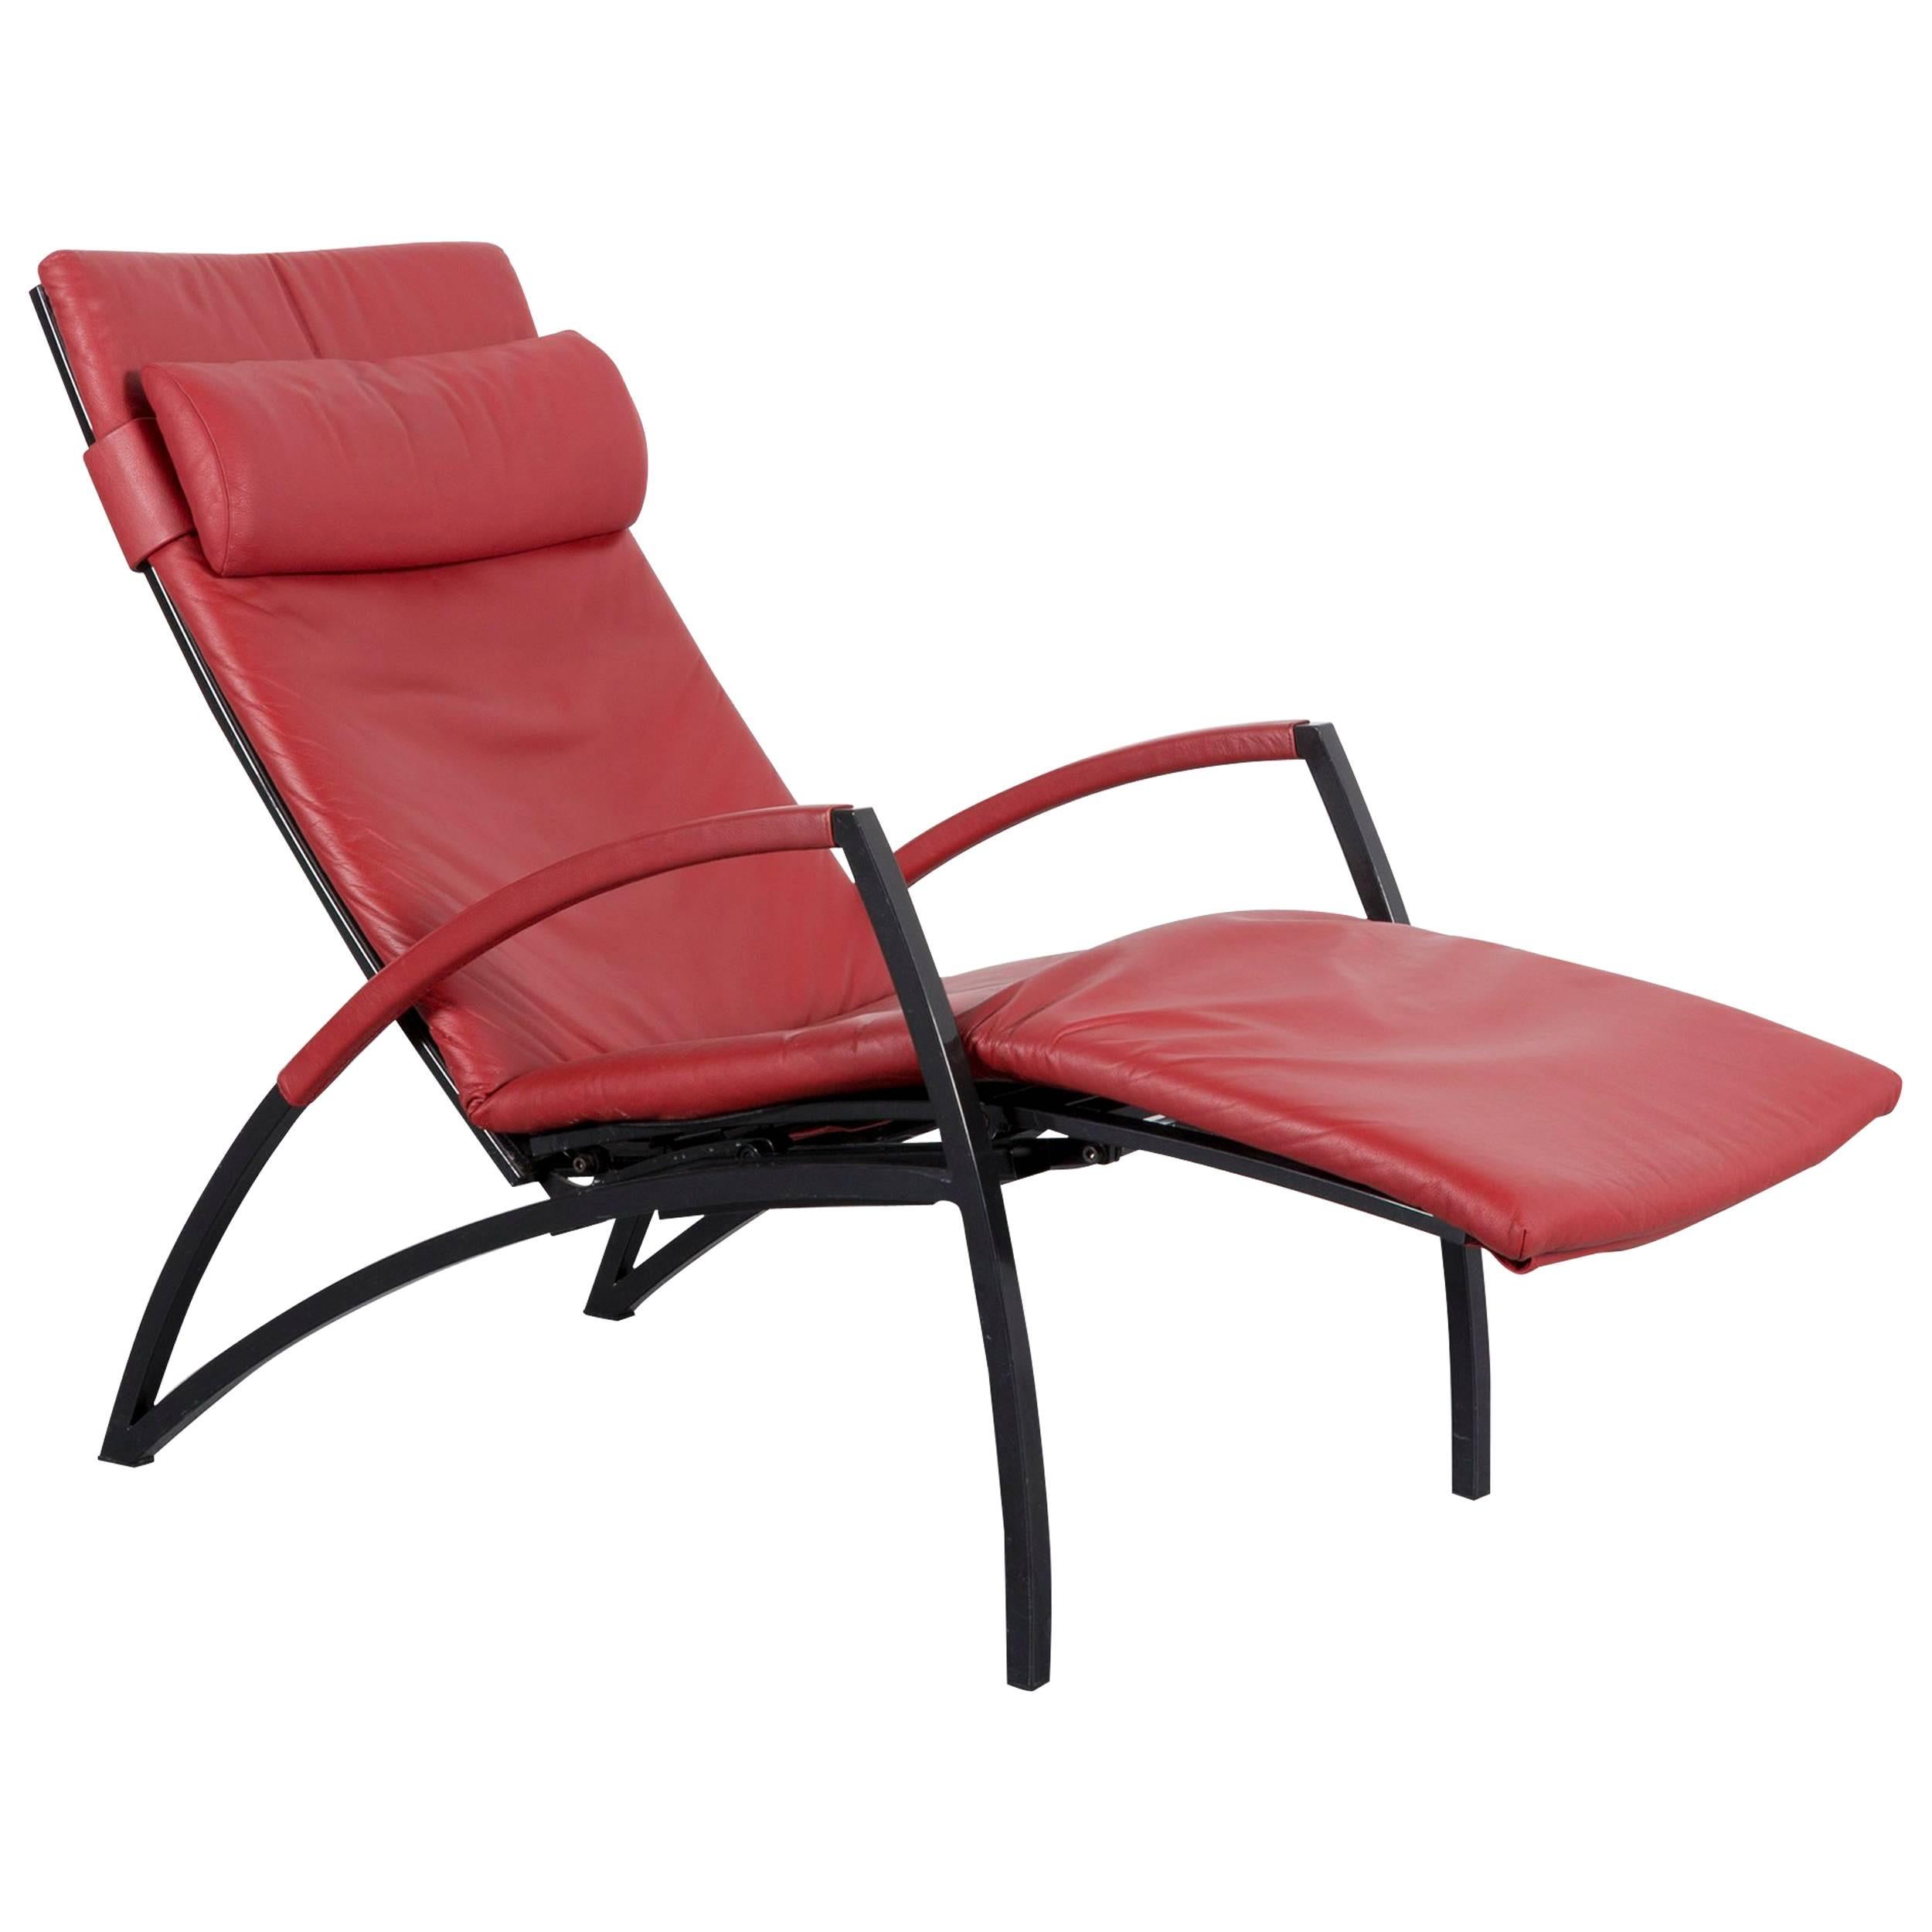 Interprofil Pax Leather Armchair Red One-Seat Couch